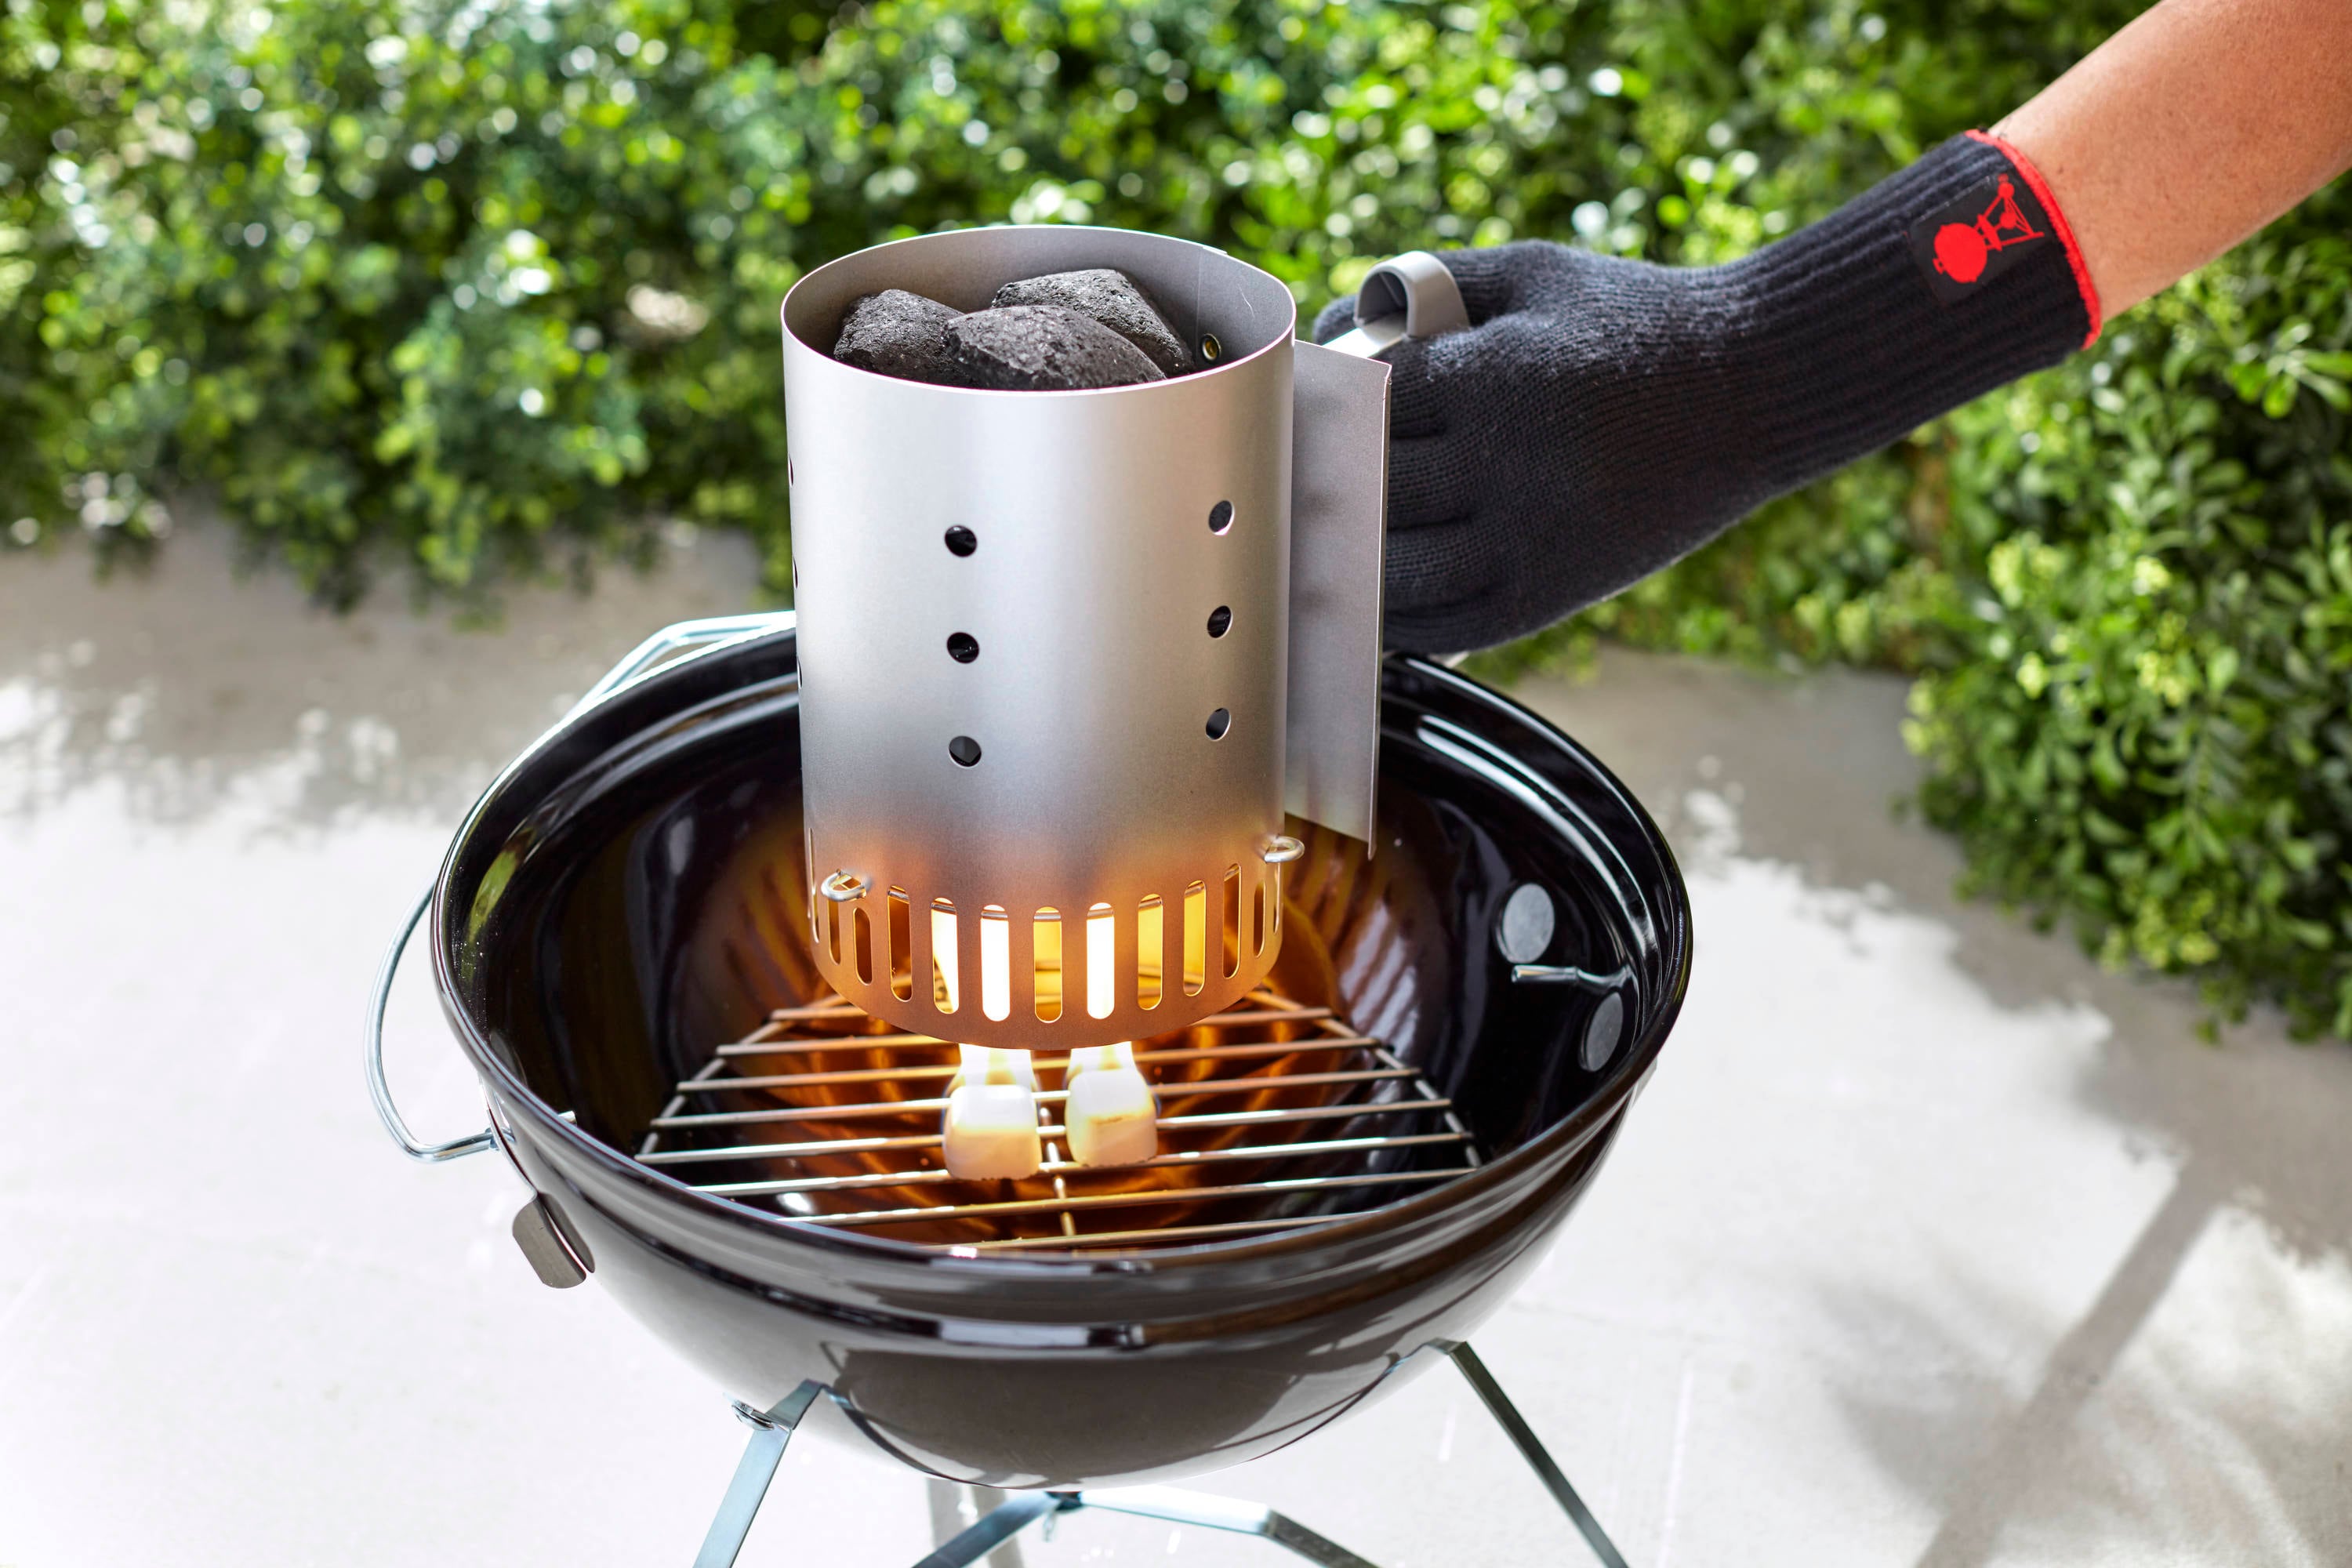 20+ Best Grill Accessories for 2023 - BBQ Accessories for Grilling